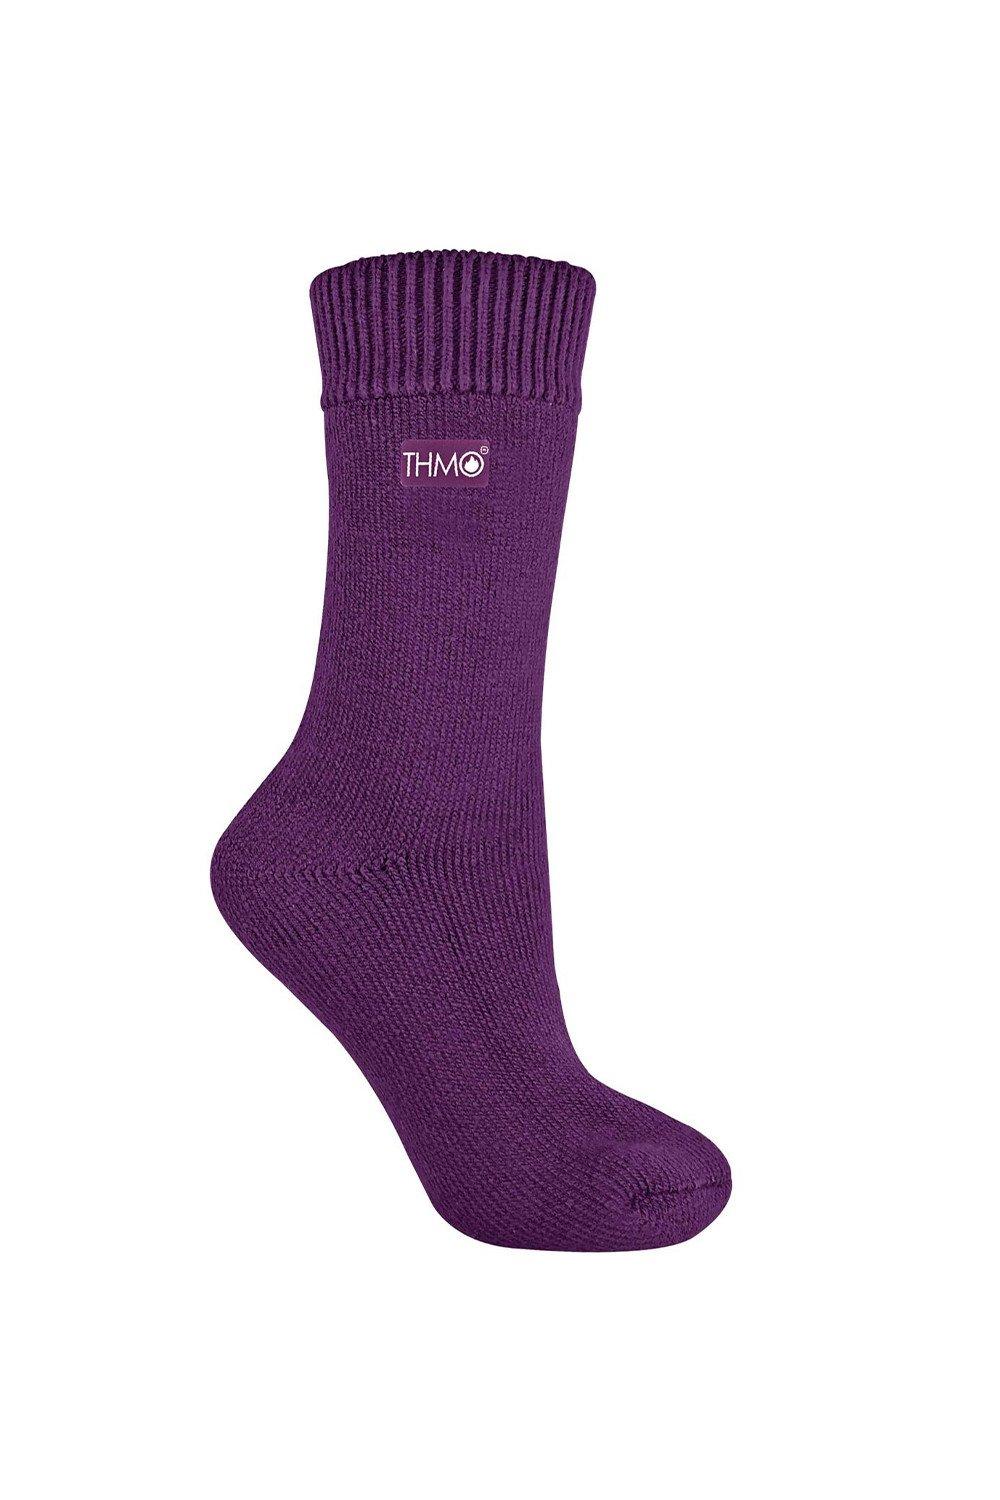 Thick Soft Fleece Lined Warm Thermal Socks for Winter